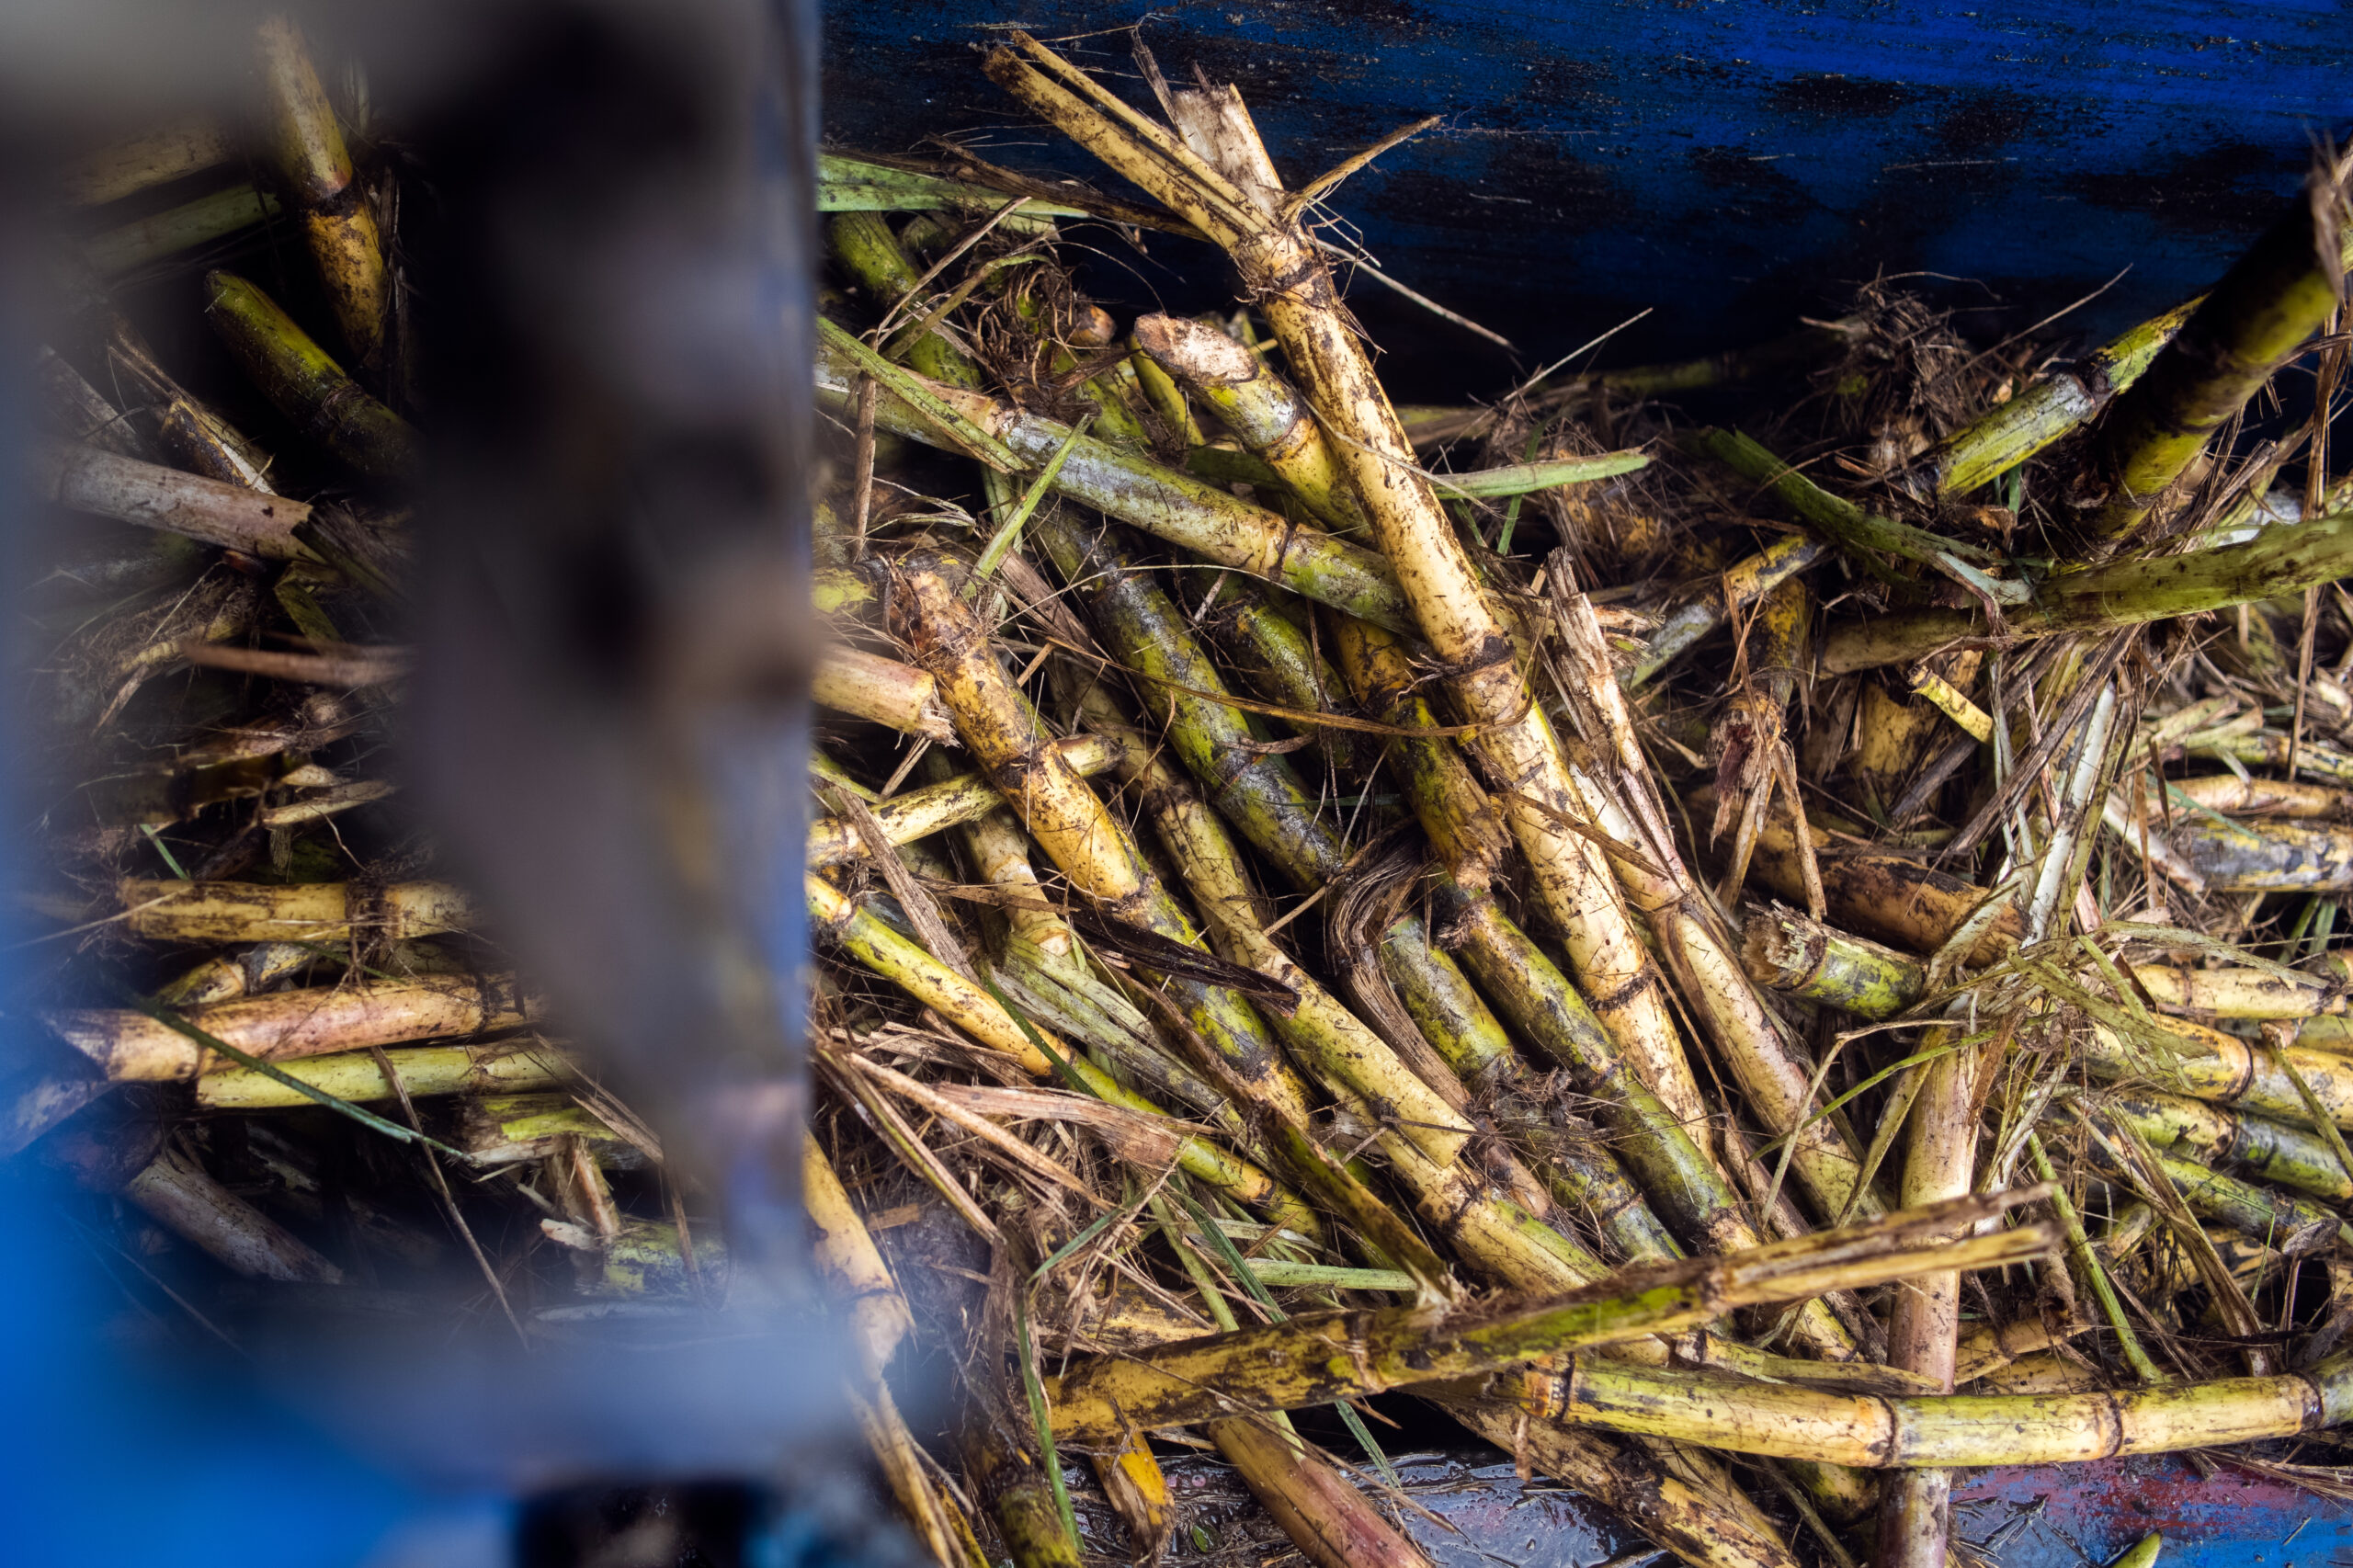 Freshly harvested cane goes straight to the mill